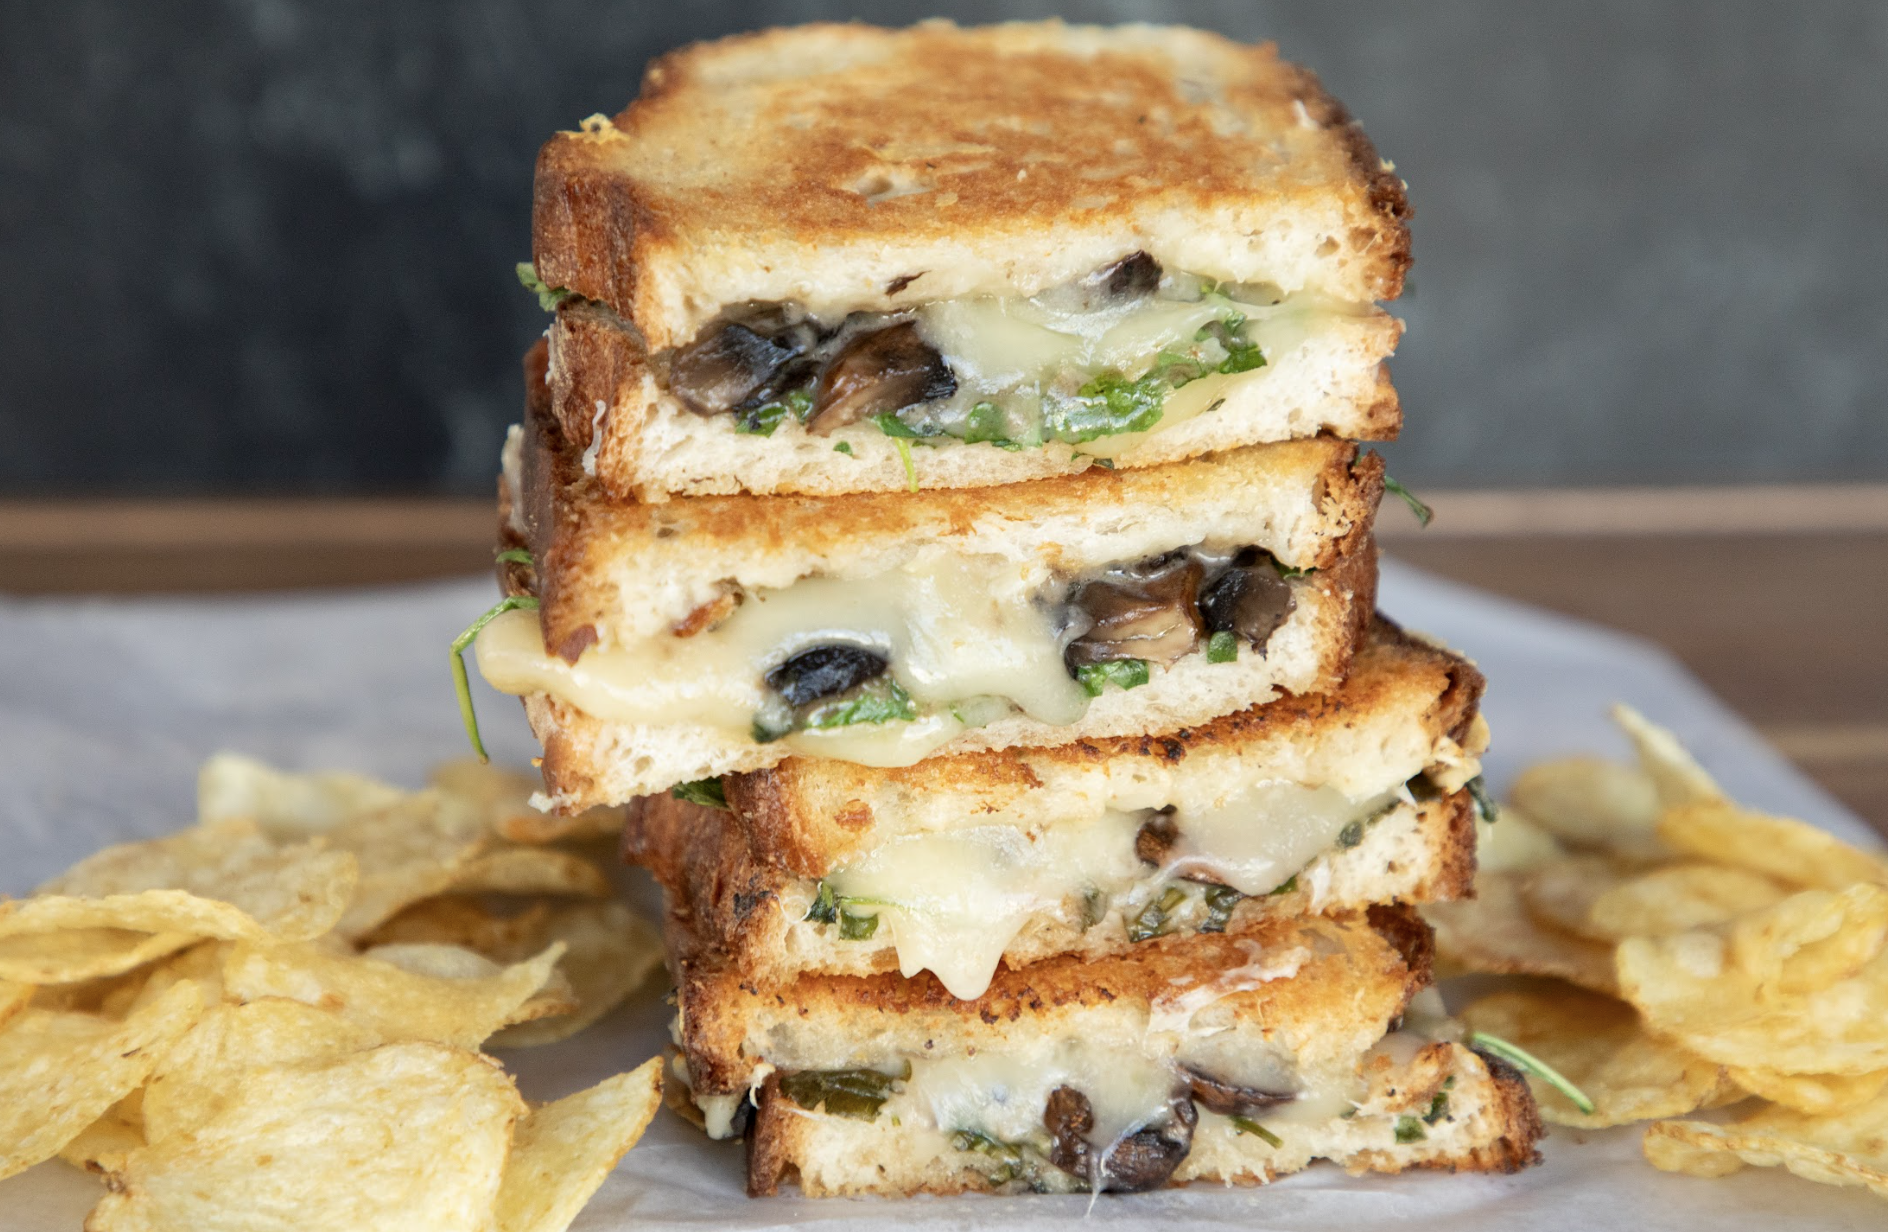 Black Truffle Grilled Cheese